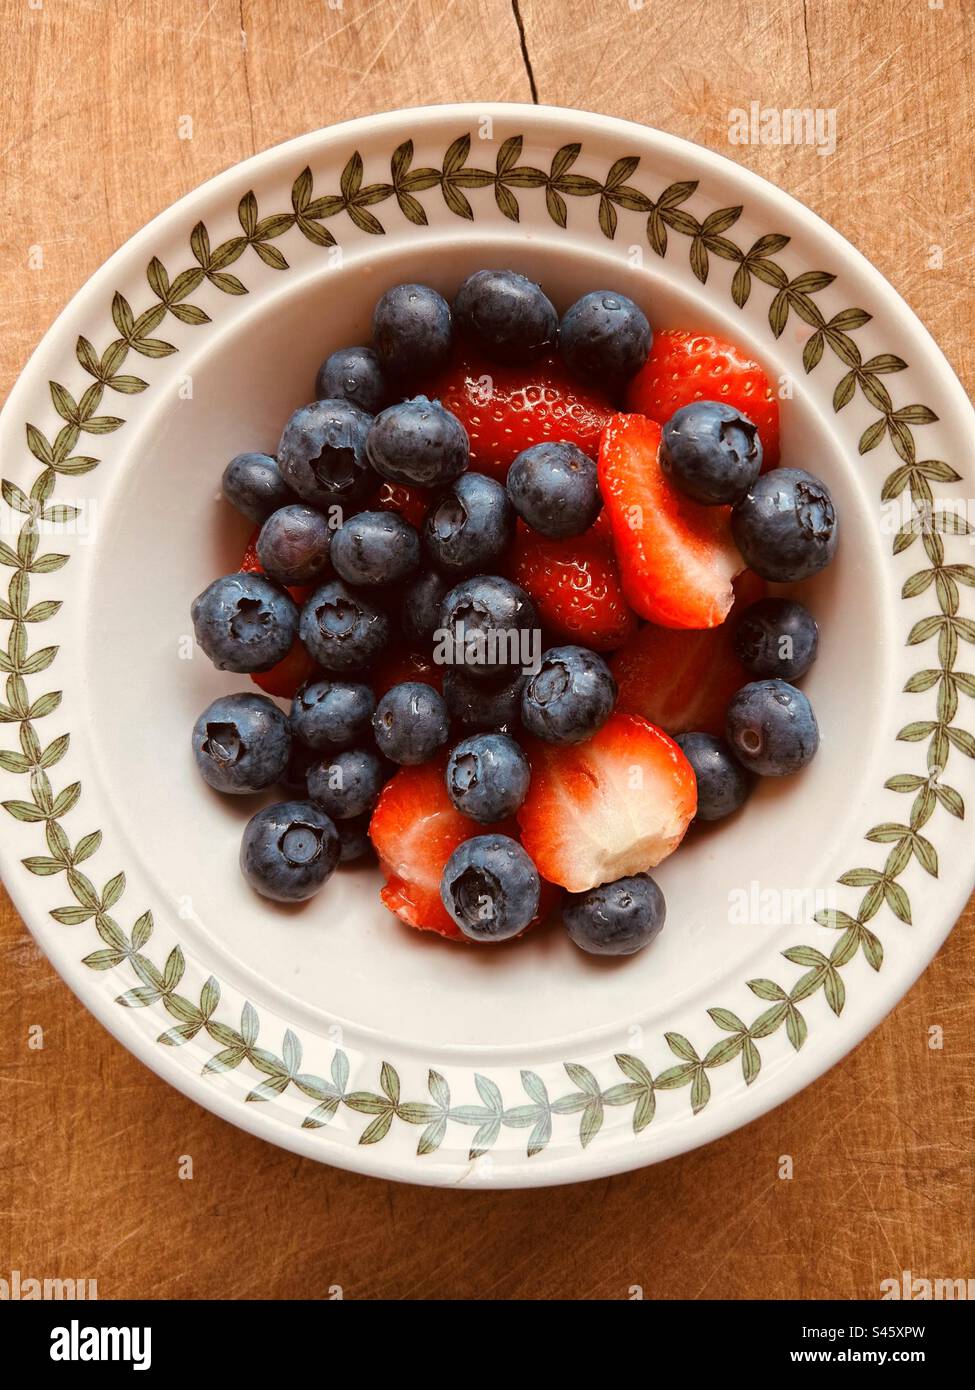 Colourful fresh summer blueberries  and strawberries in a ceramic breakfast bowl. Stock Photo